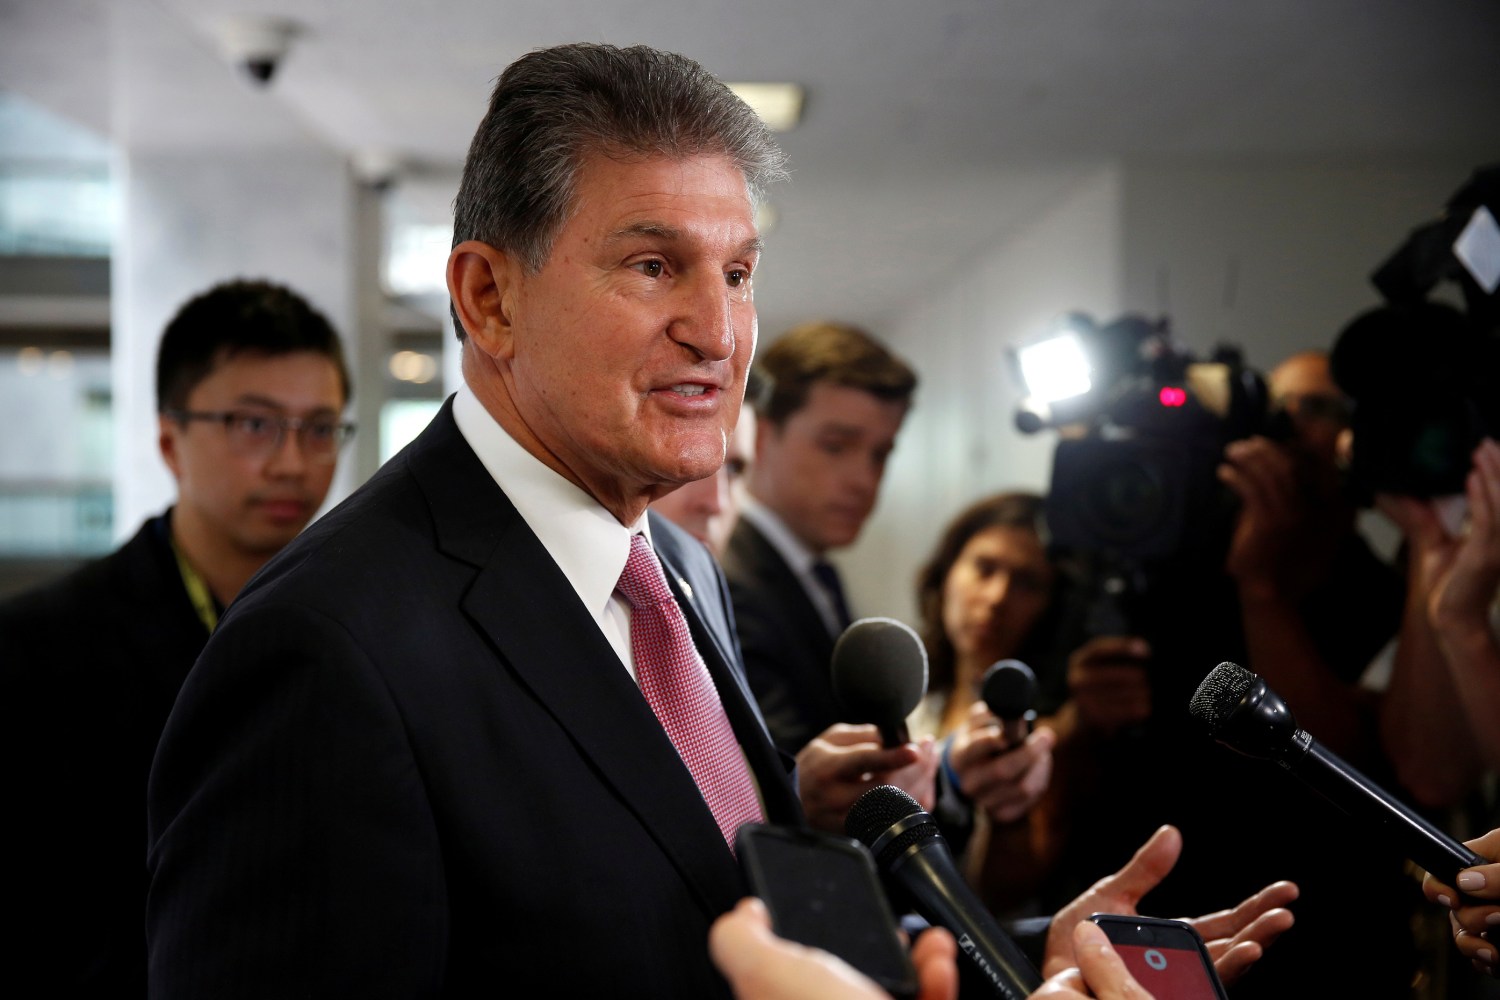 Senator Joe Manchin (D-WV) speaks to the media as he arrives for a Senate Intelligence Committee hearing evaluating the Intelligence Community Assessment on "Russian Activities and Intentions in Recent US Elections" on Capitol Hill in Washington, U.S., May 16, 2018.      REUTERS/Joshua Roberts - RC1FB49C5220